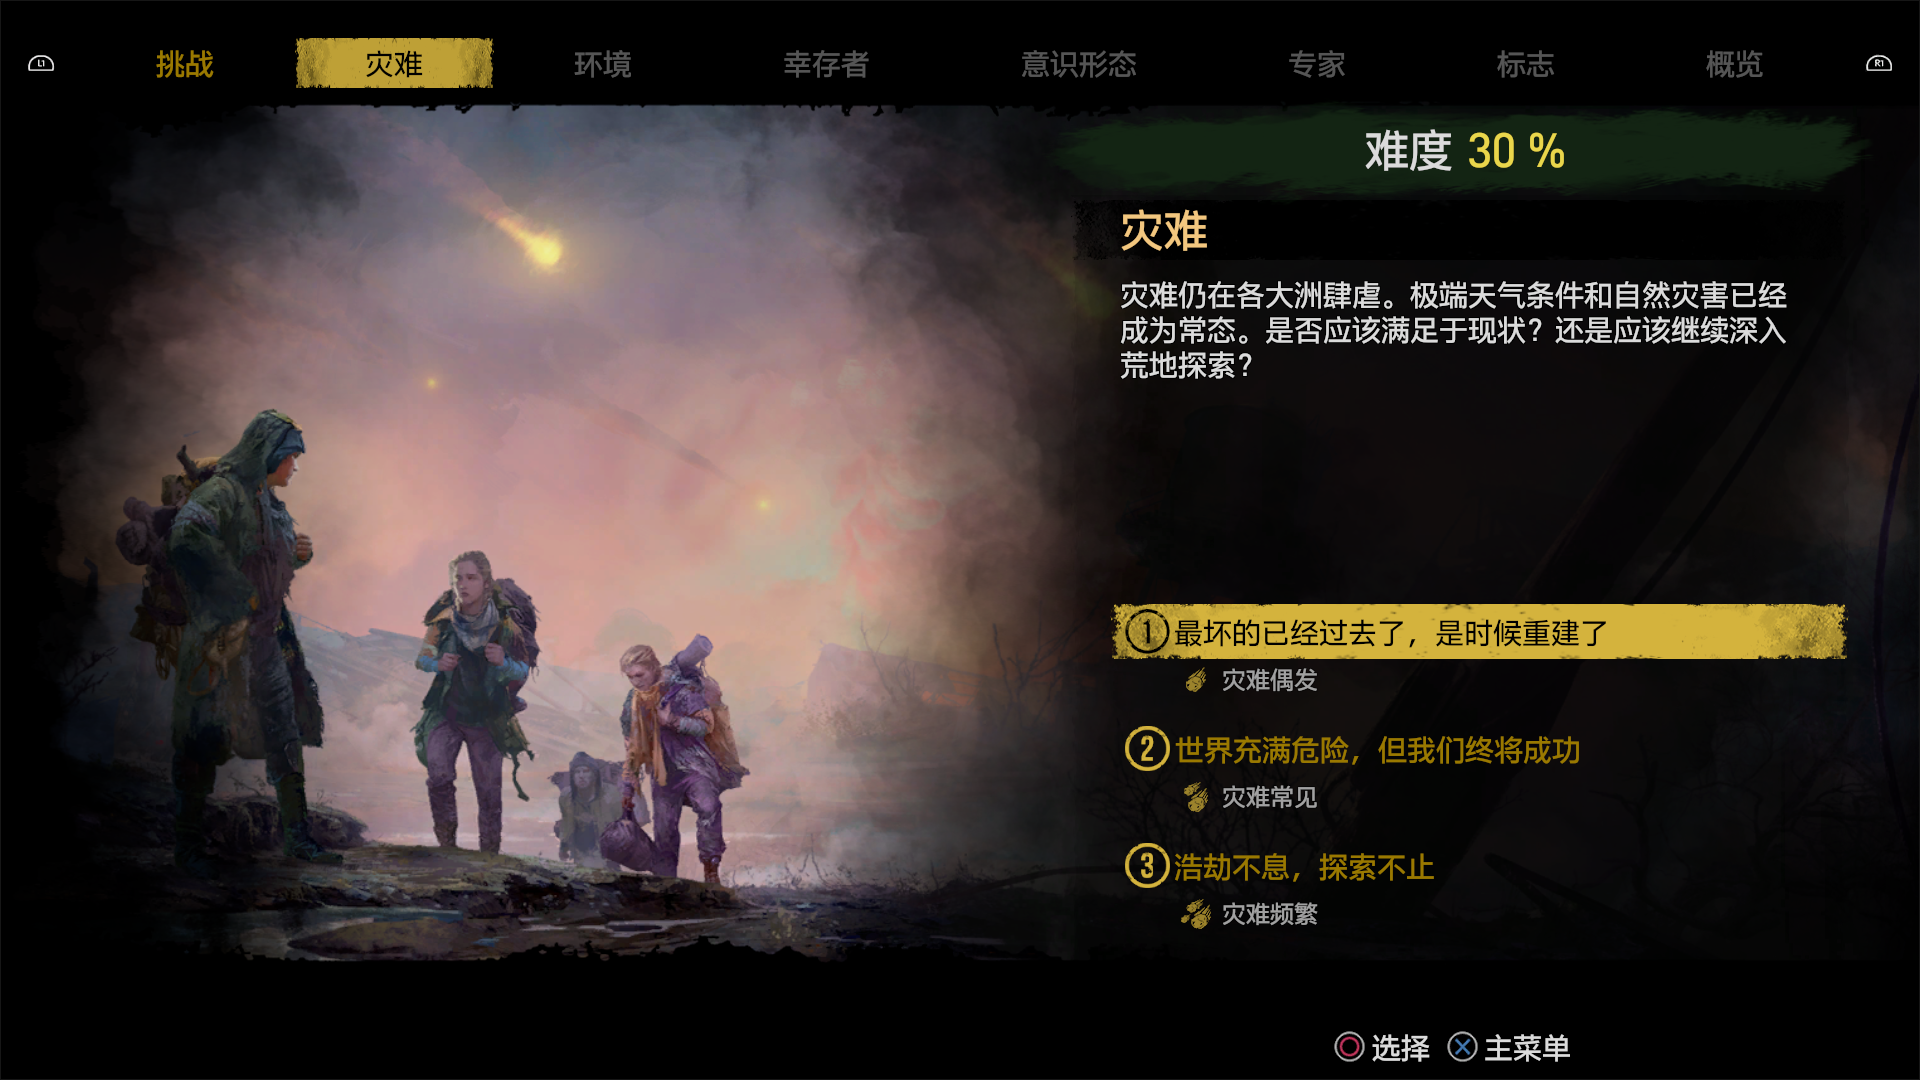 《Surviving the Aftermath》將於7月登陸PS4與Switch